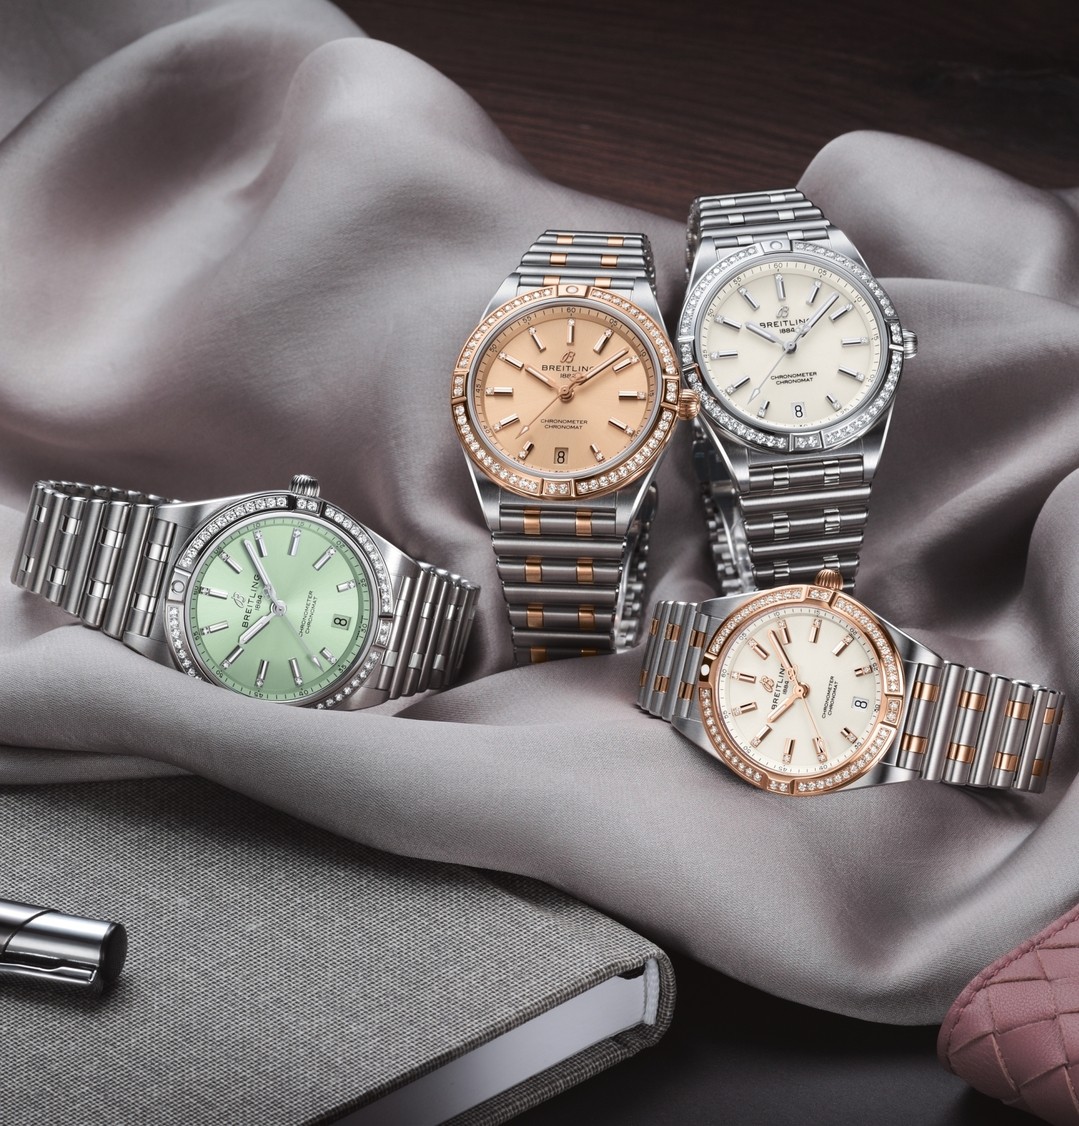 Breitling® | Swiss Luxury Watches of Style, Purpose & Action